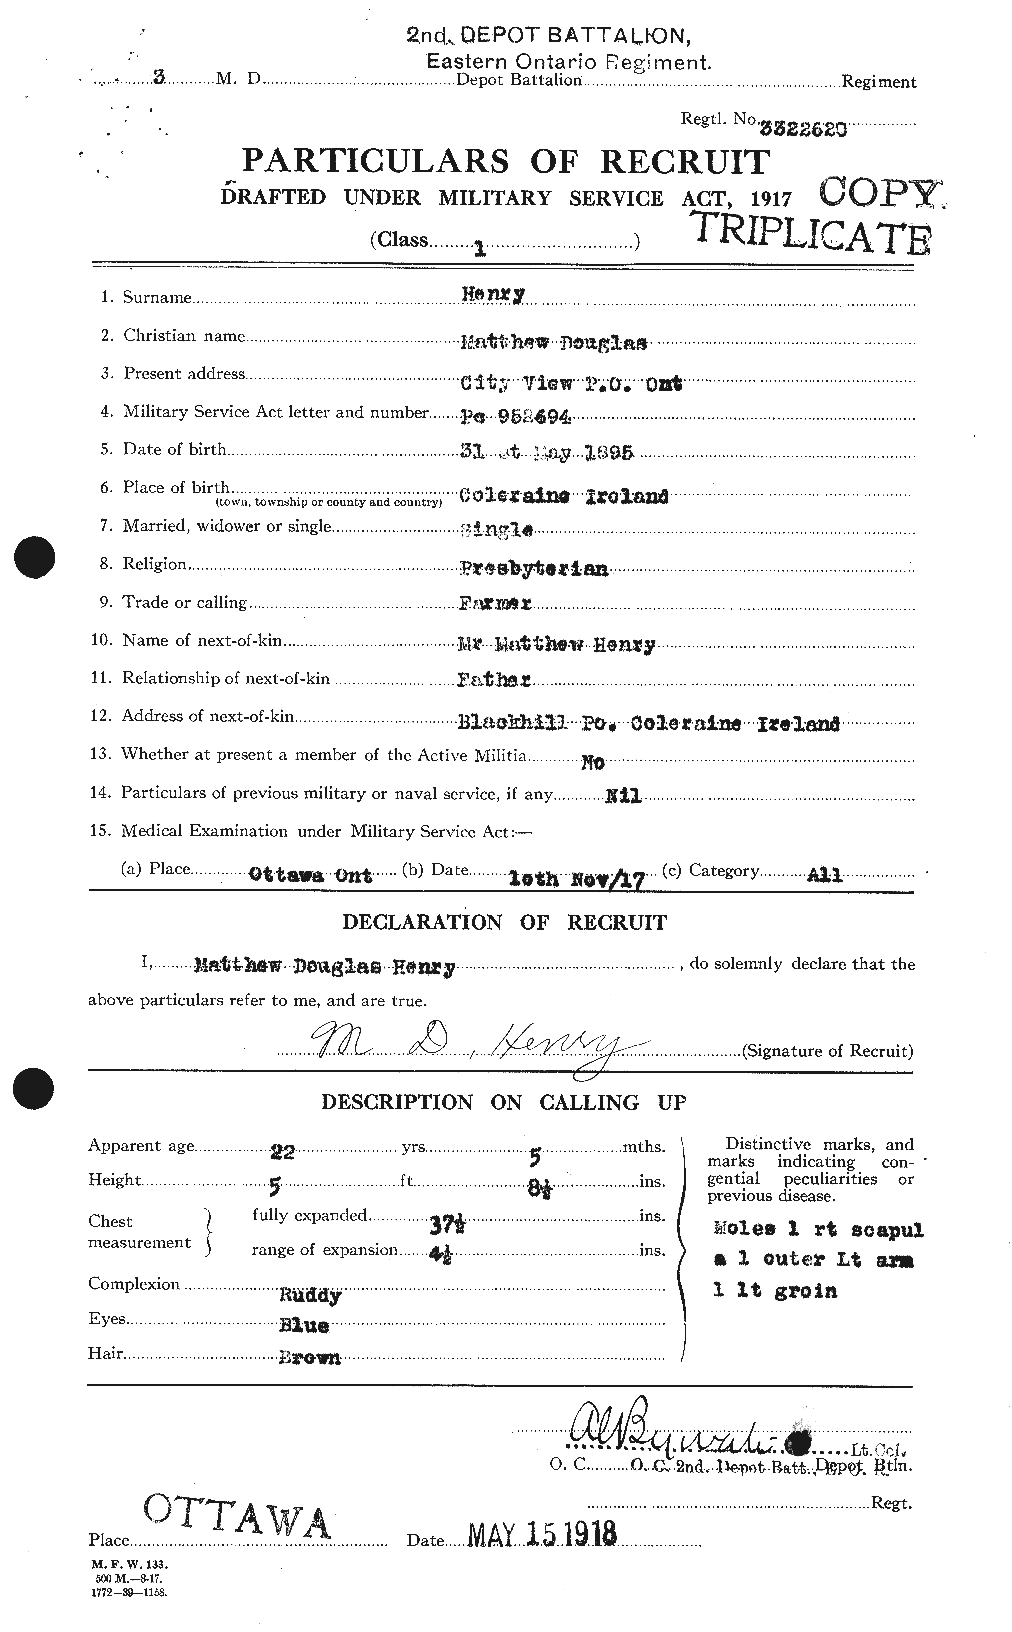 Personnel Records of the First World War - CEF 387663a